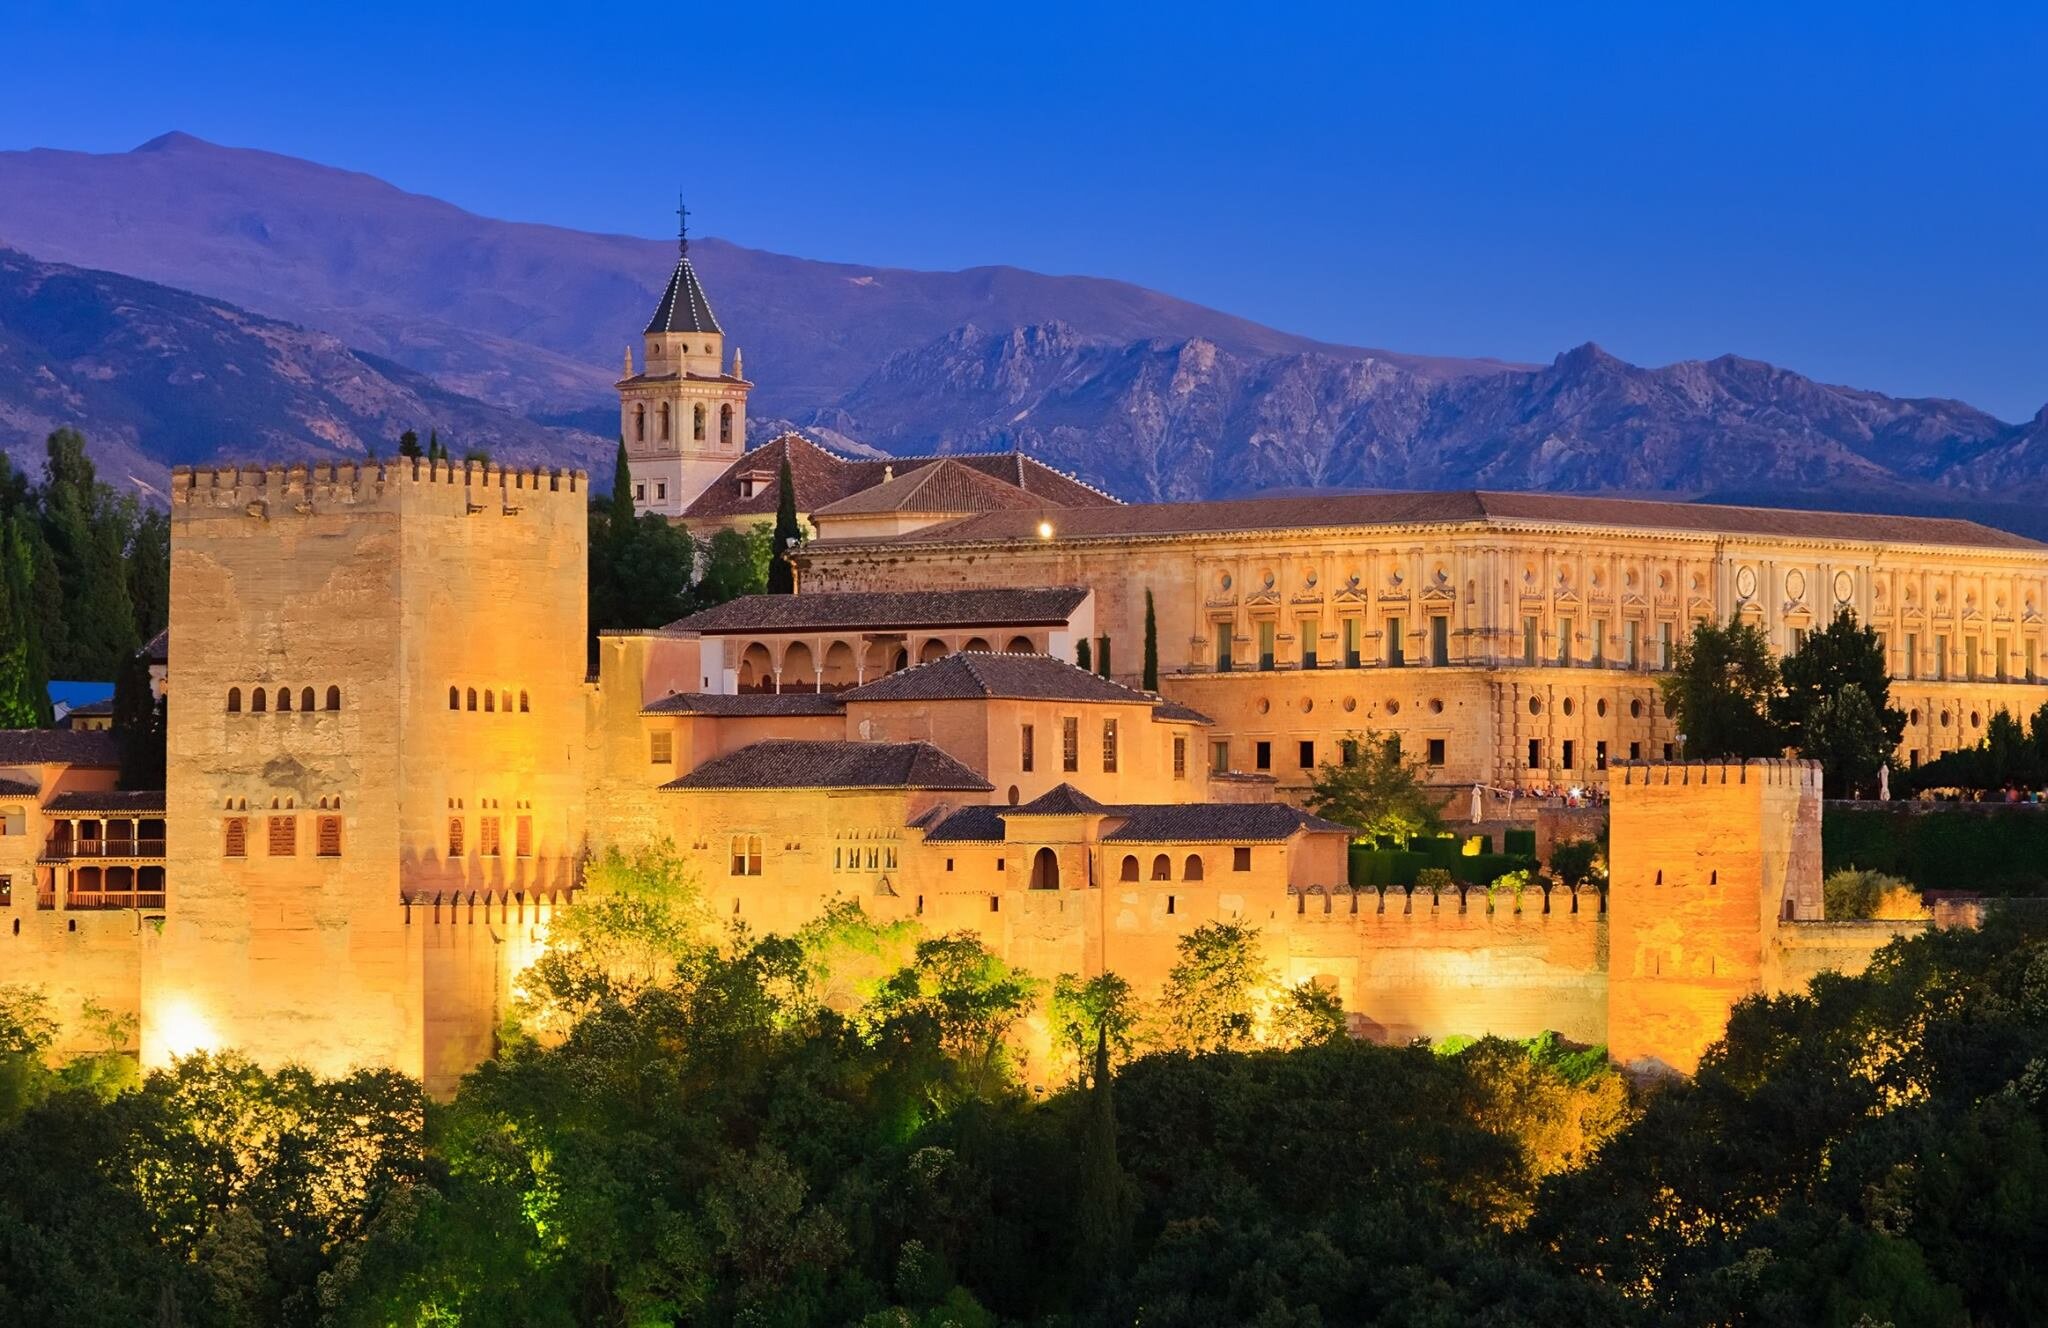 events march 2018 dt spain alhambra.jpg